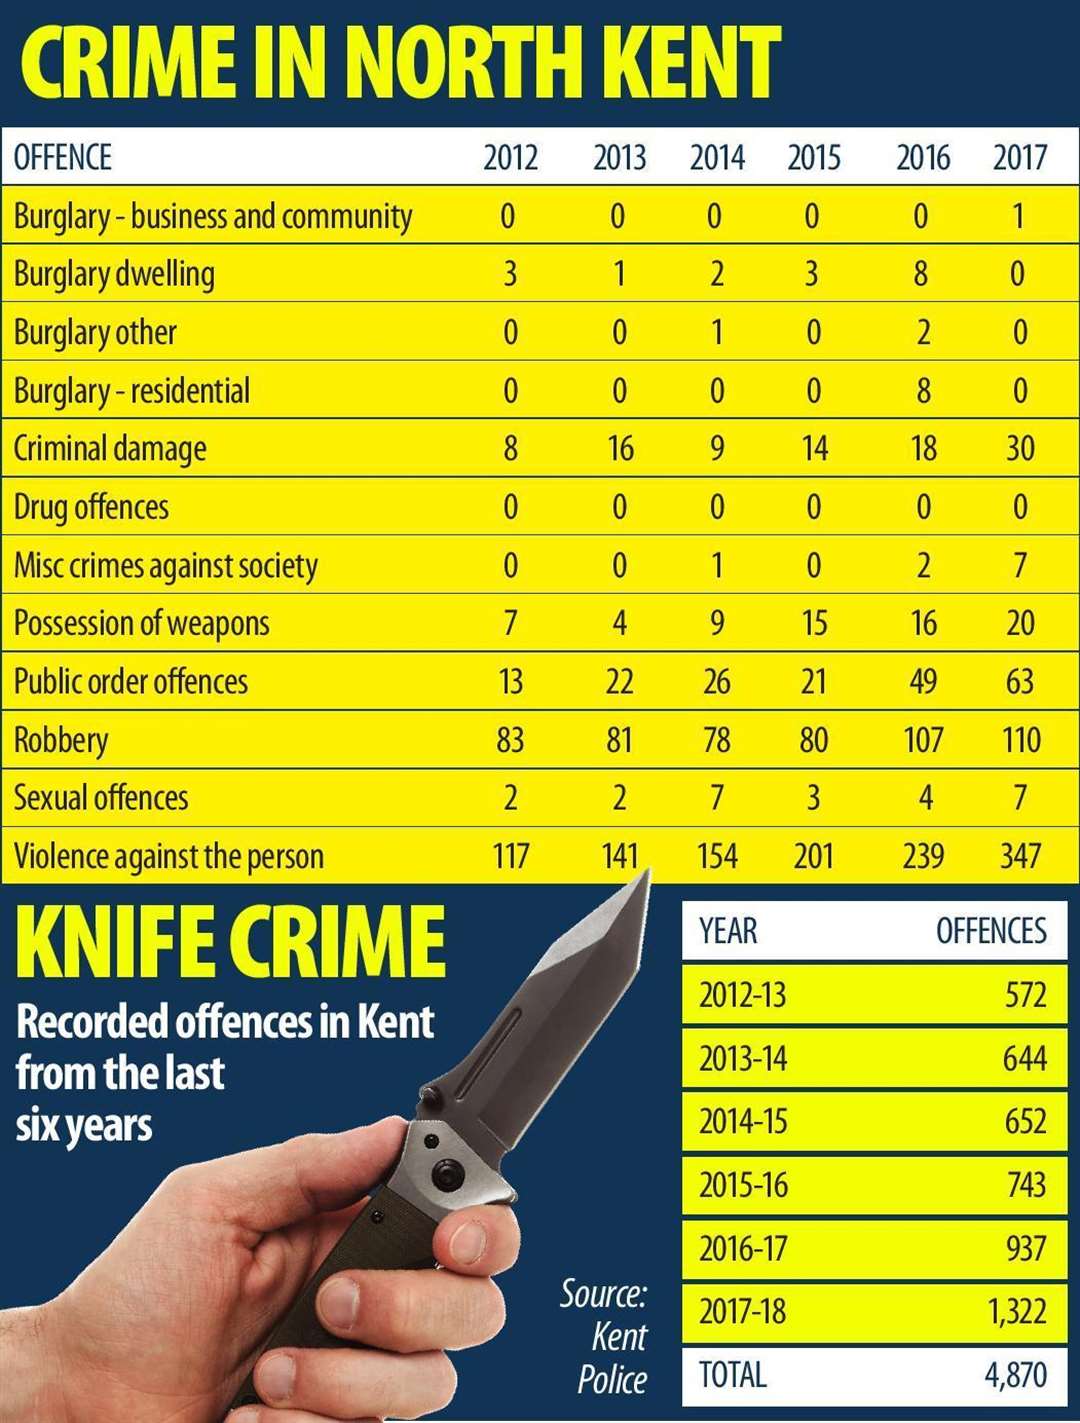 Knife crime statistics in North Kent between 2012 and 2017 (2396175)